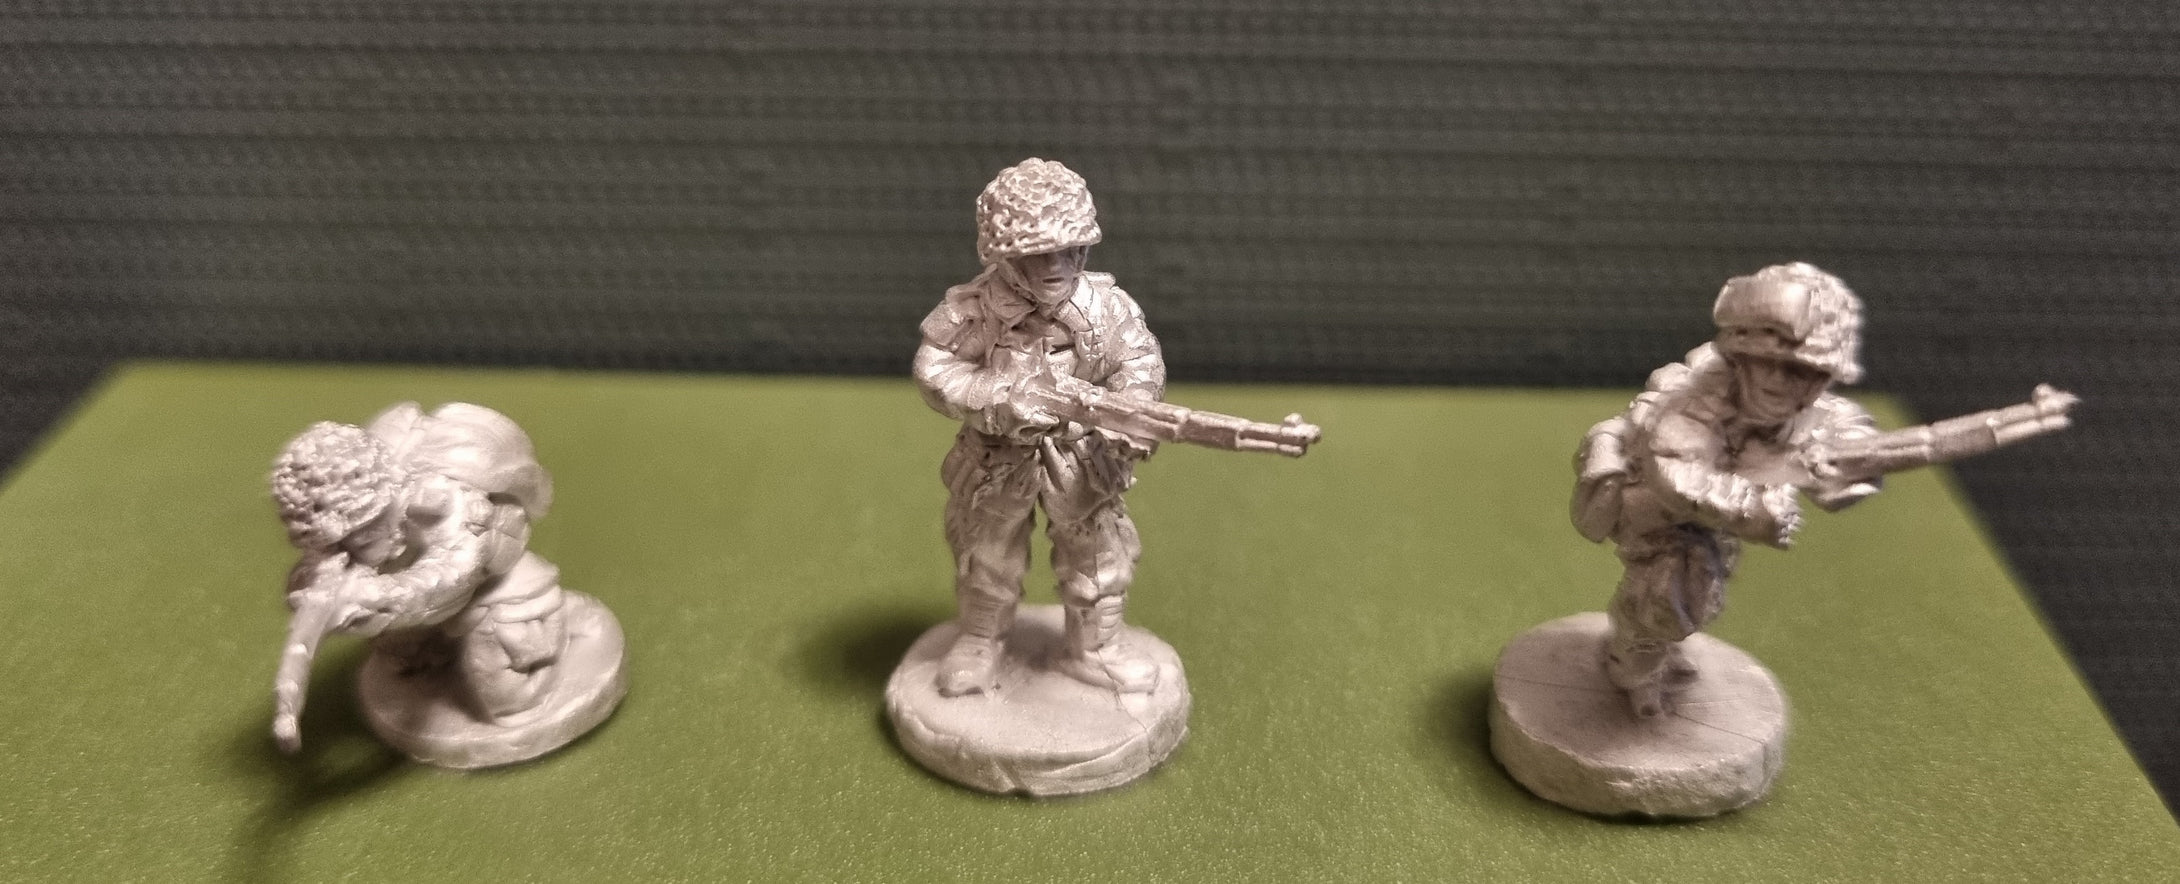 USP1a 3 US D Day Paratroopers with M1 Garand